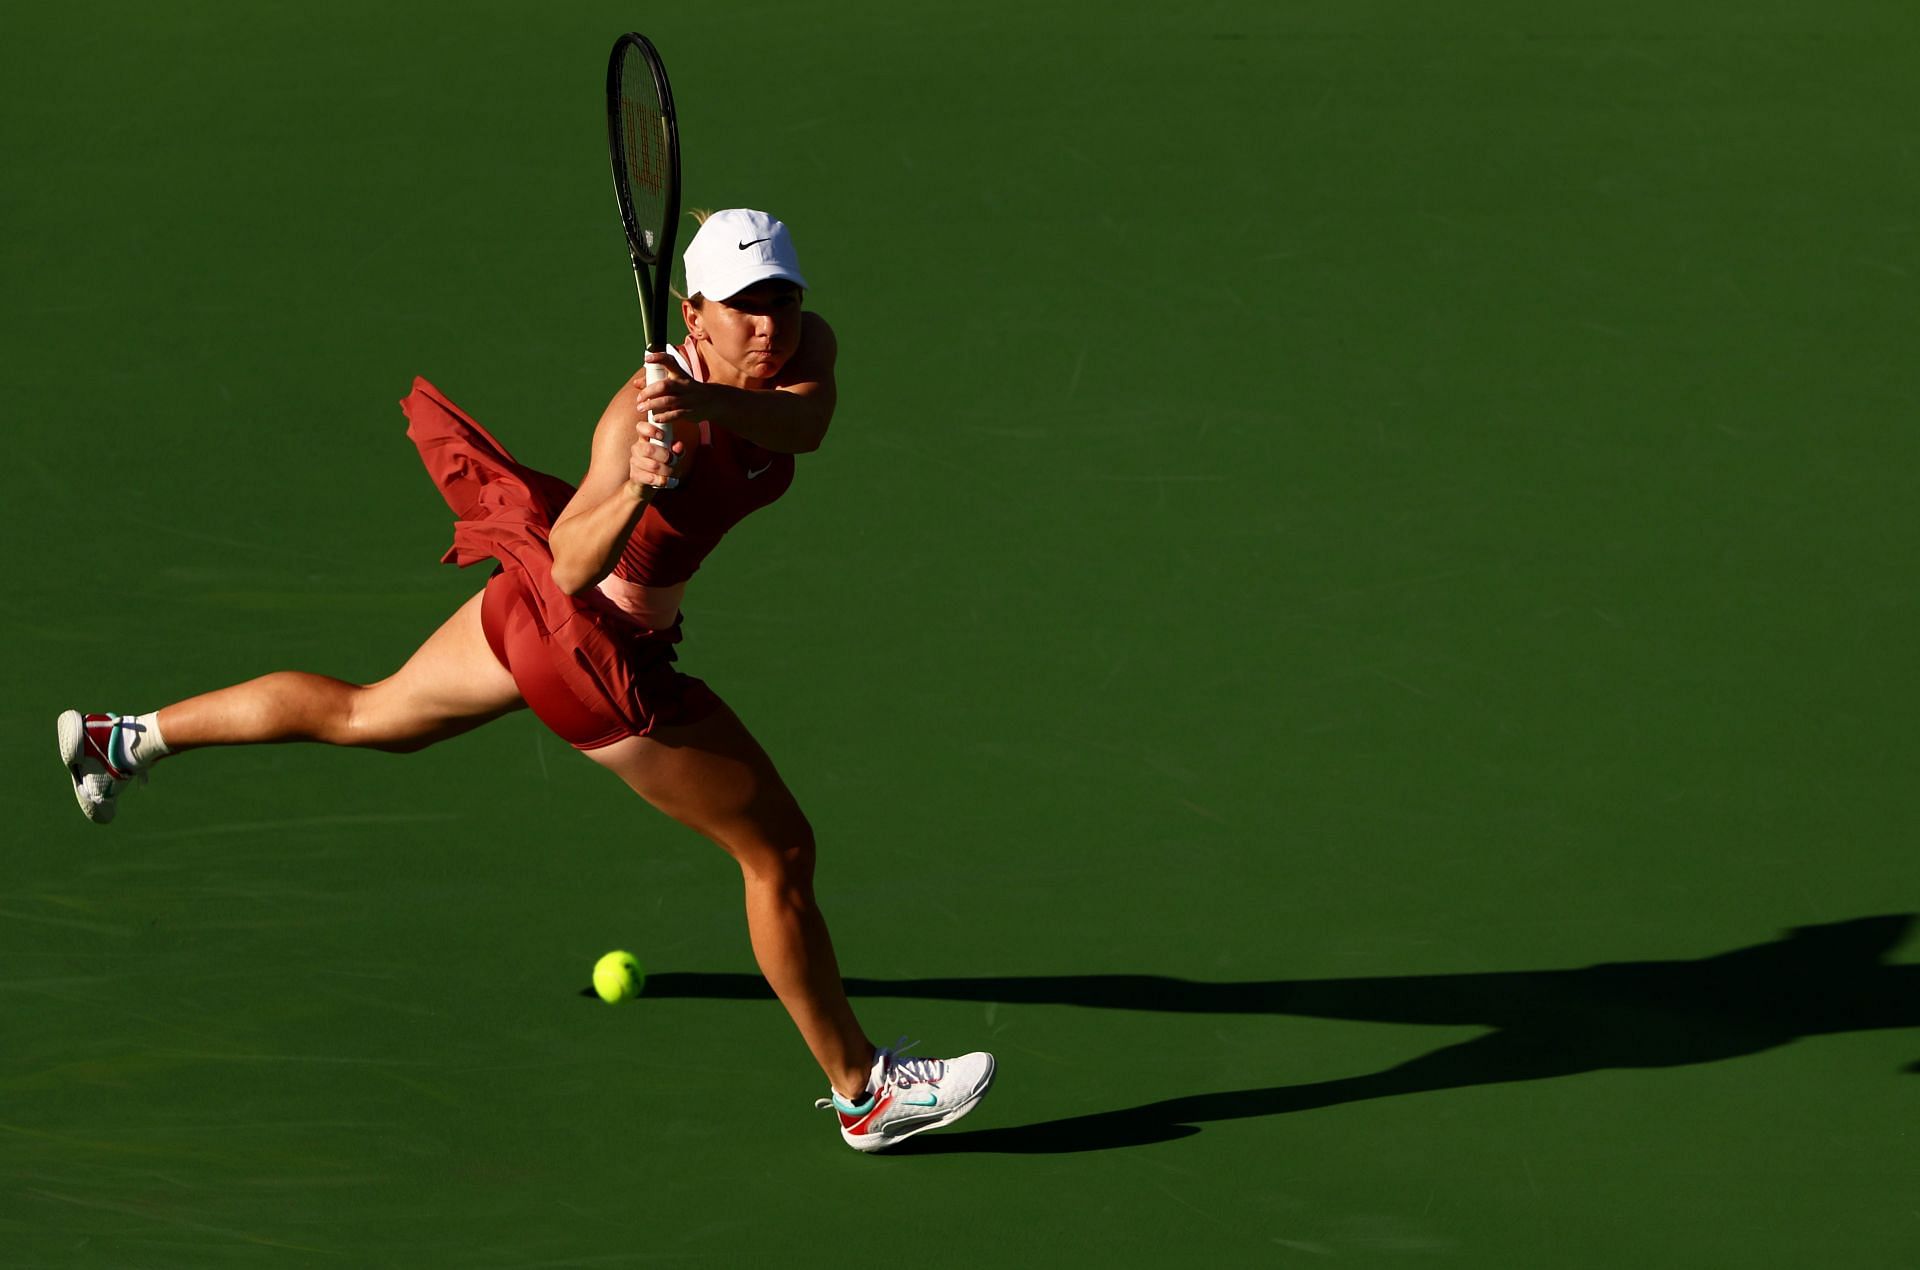 Halep in action at the 2022 BNP Paribas Open